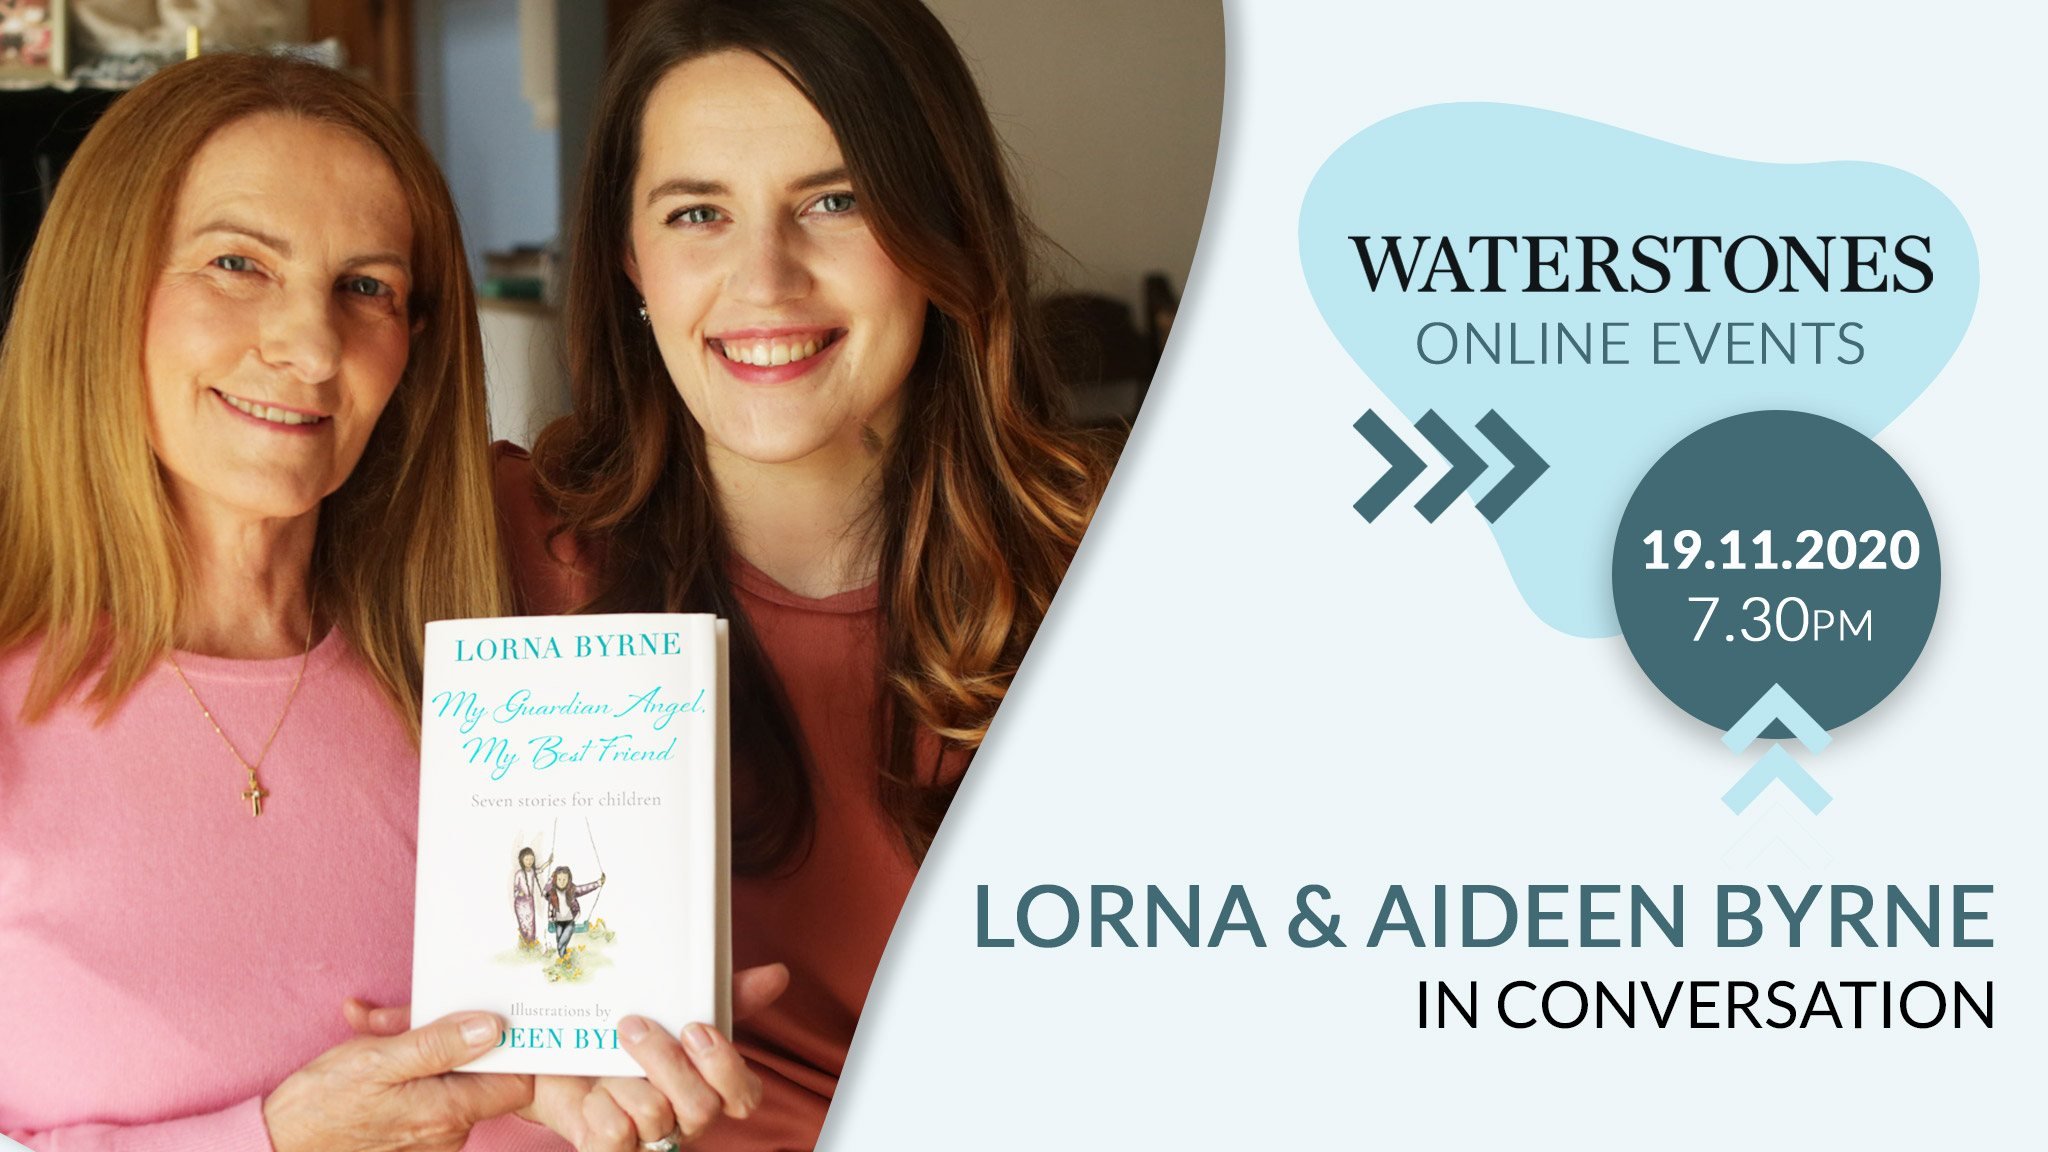 Lorna and Aideen Byrne in conversation Events at Waterstones